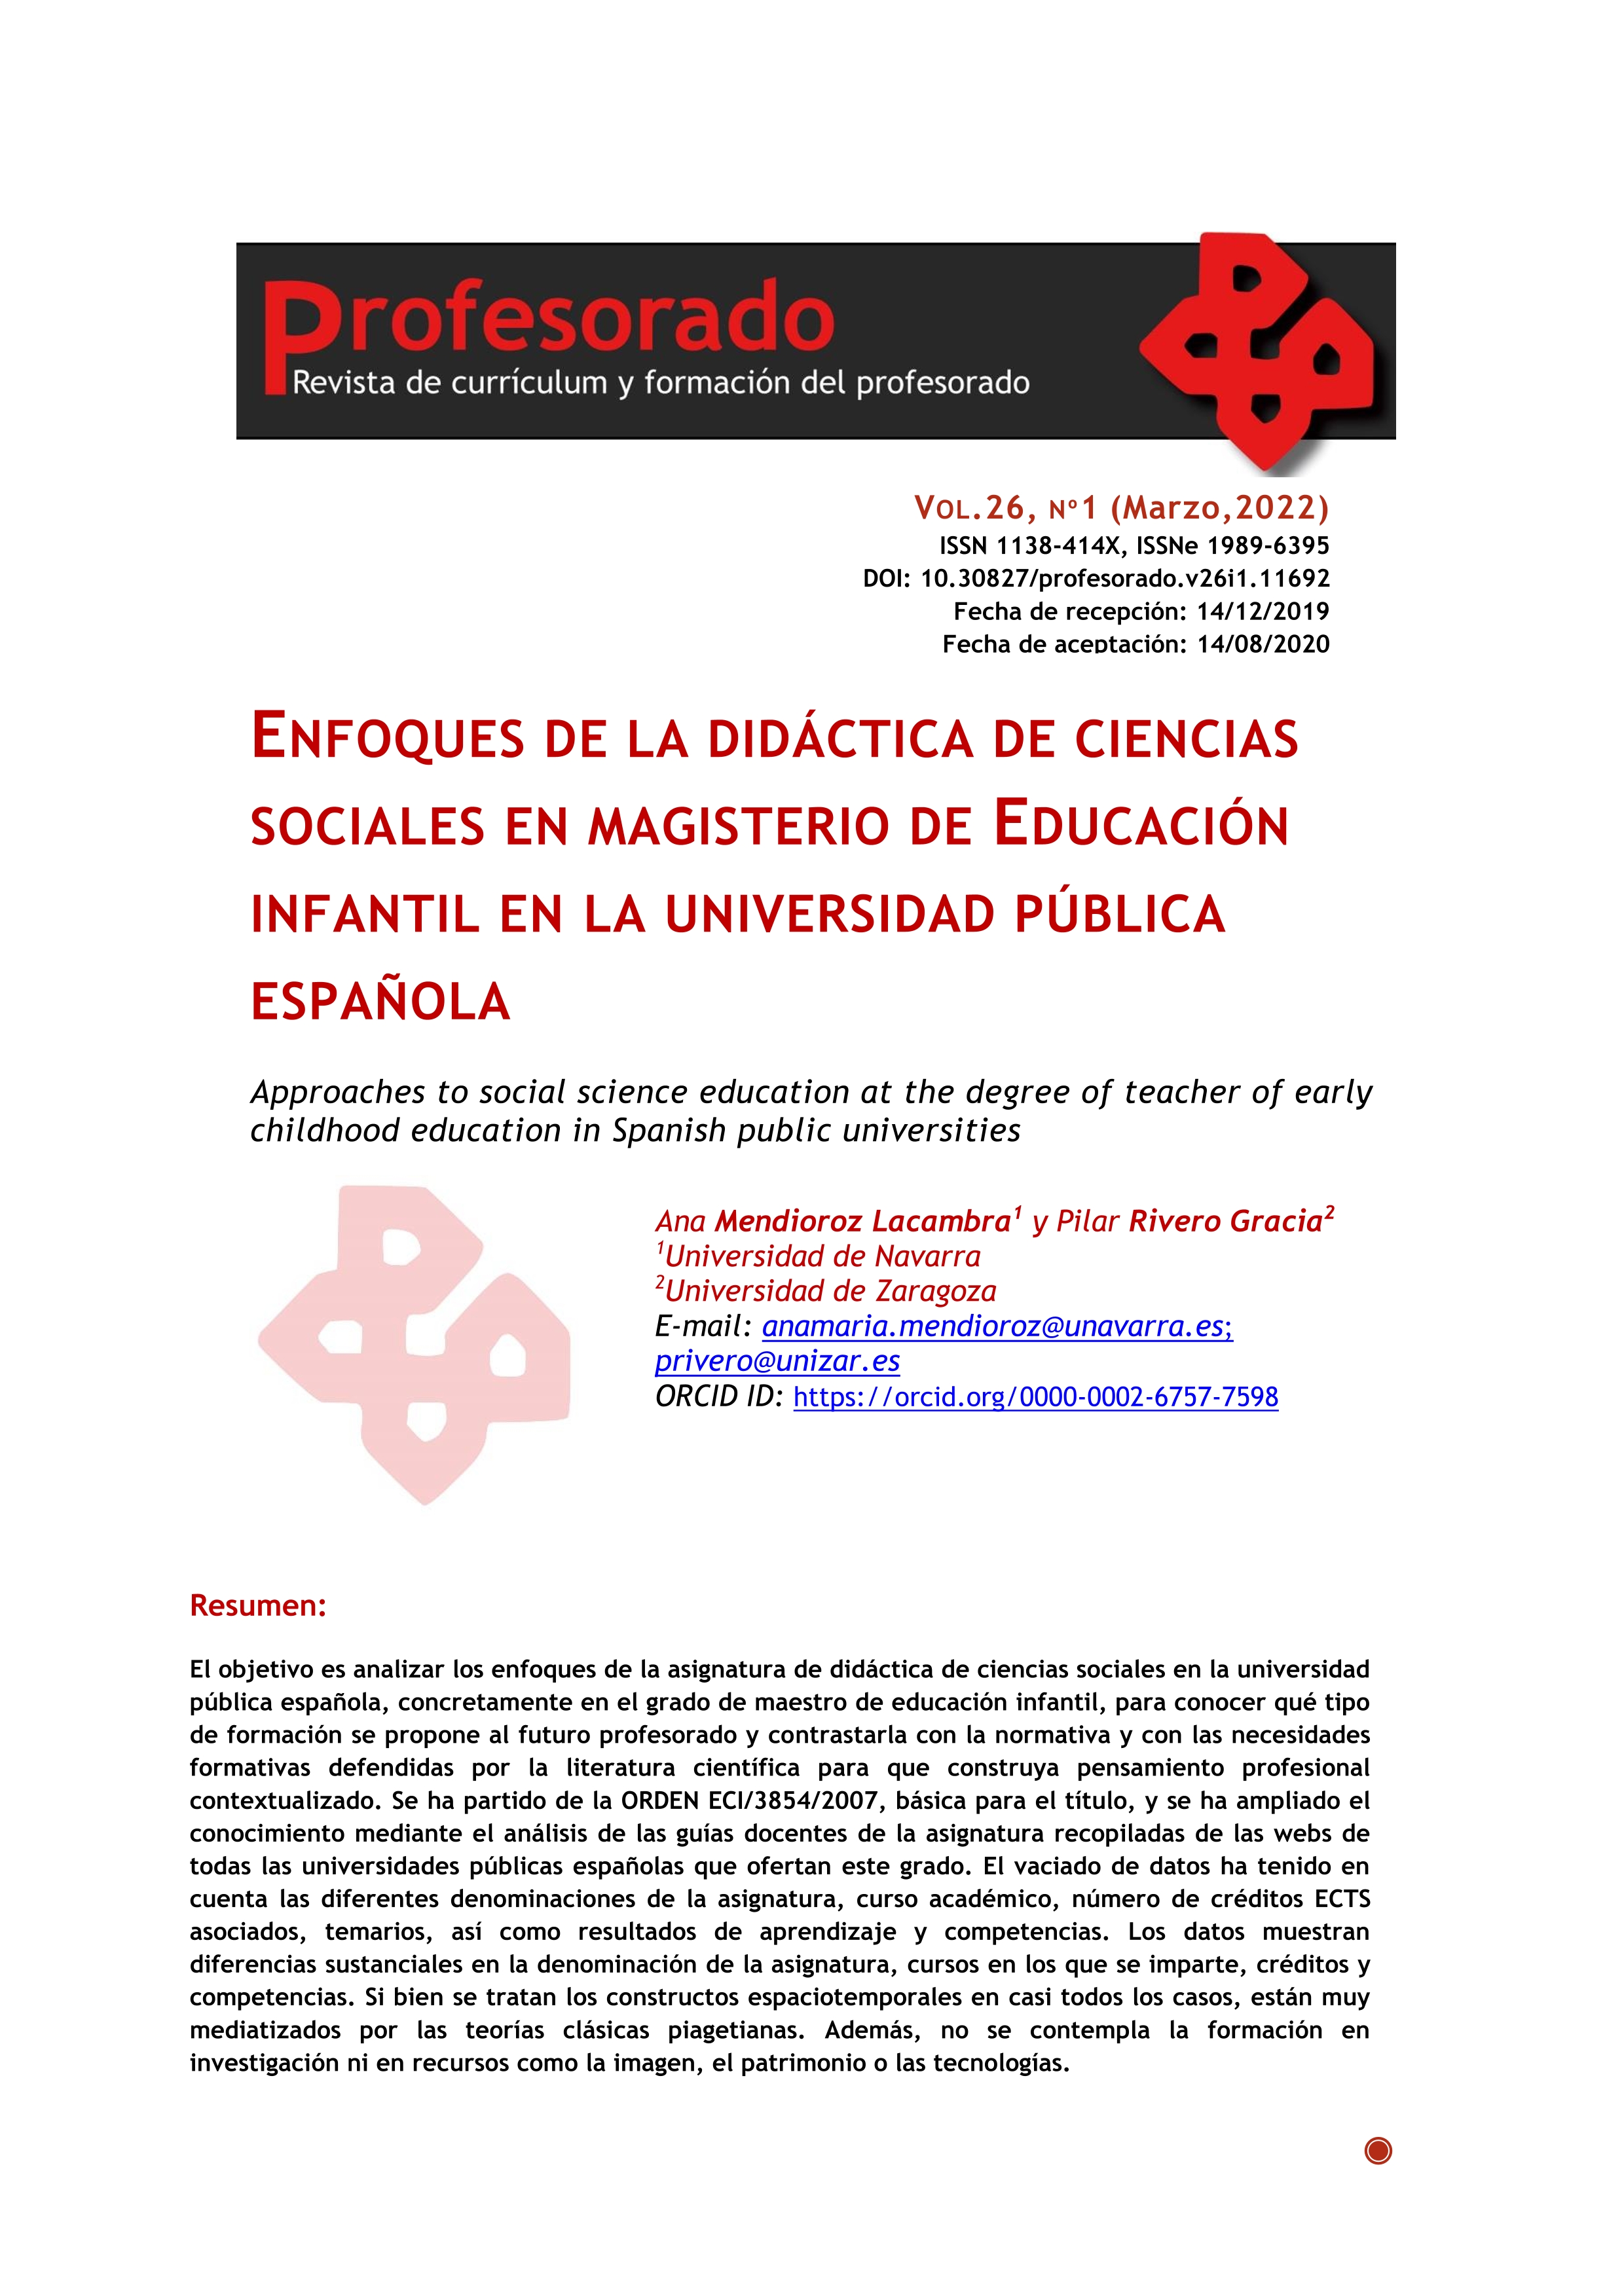 Approaches to social science education at the degree of teacher of early childhood education in Spanish public universities